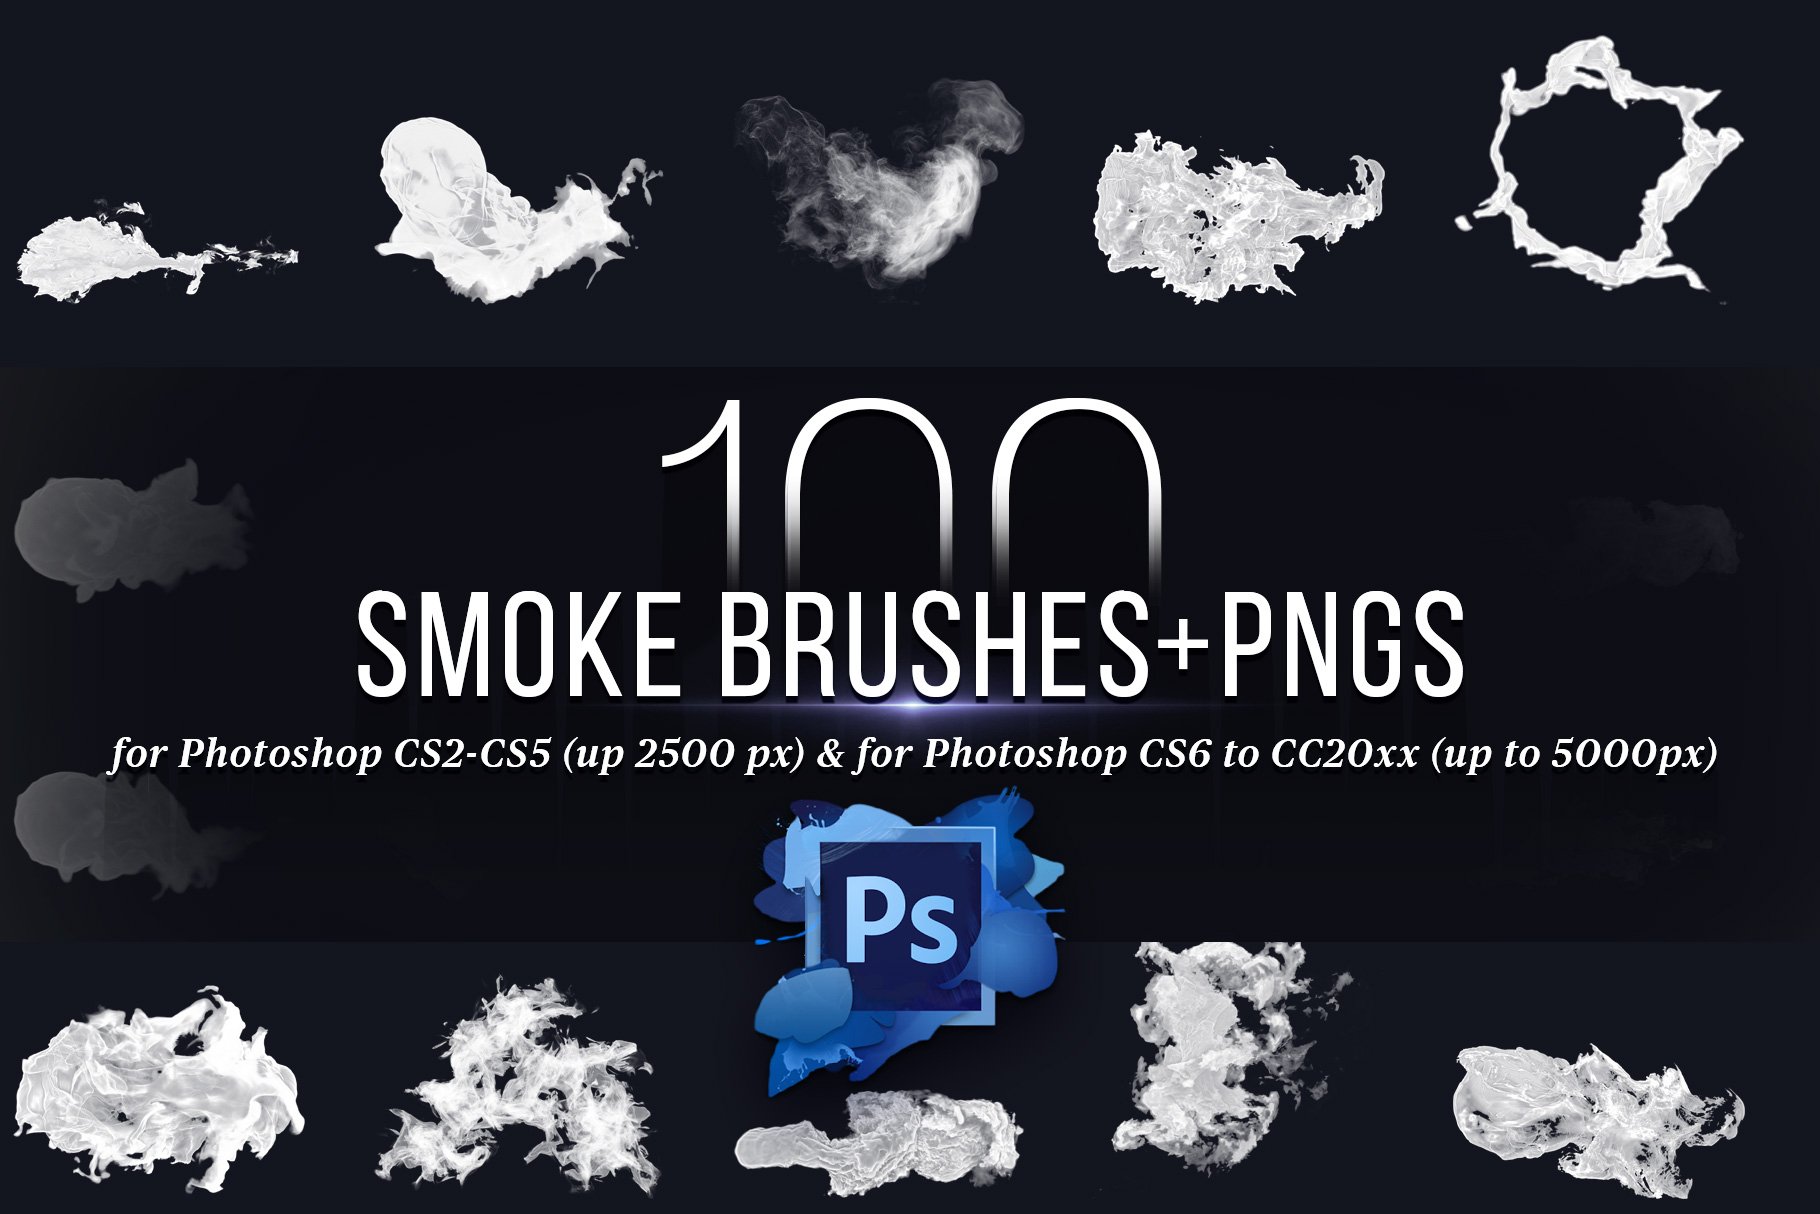 100 smoke brushes for photoshop and pngs preview 04 885